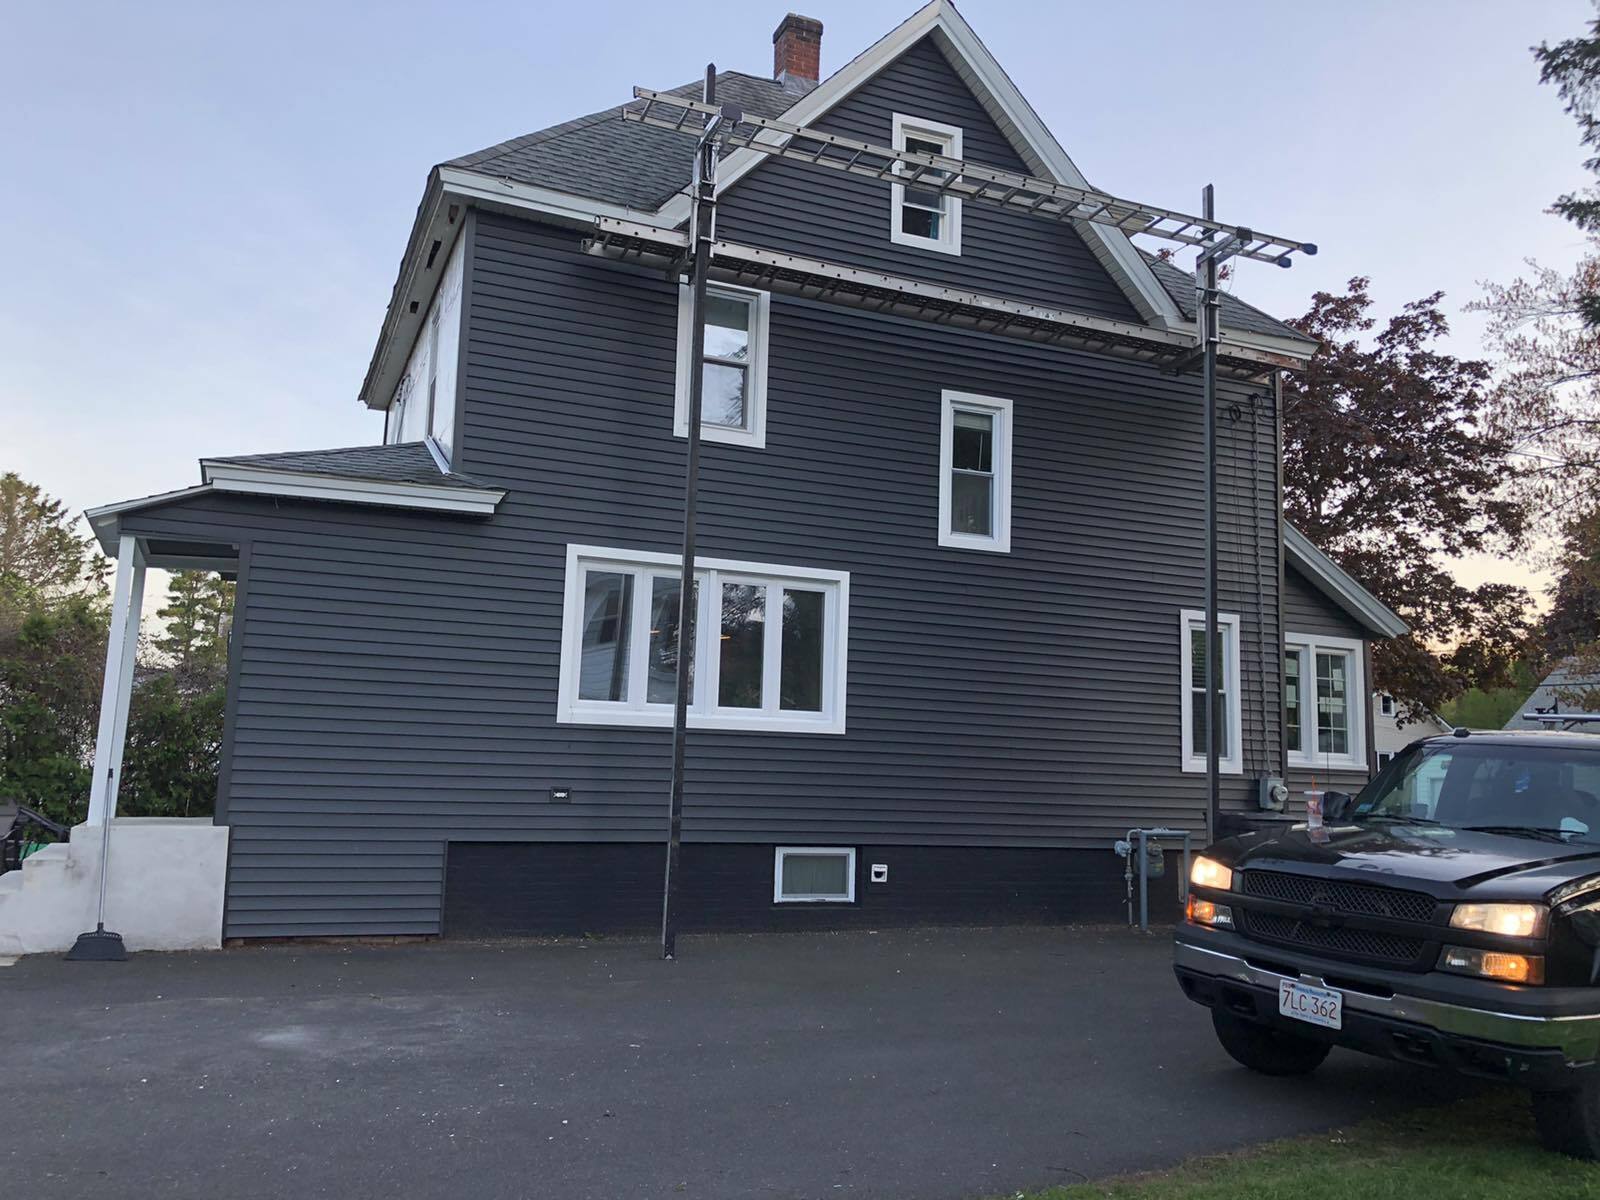 From antique to modern, all thanks to brand new siding and windows.